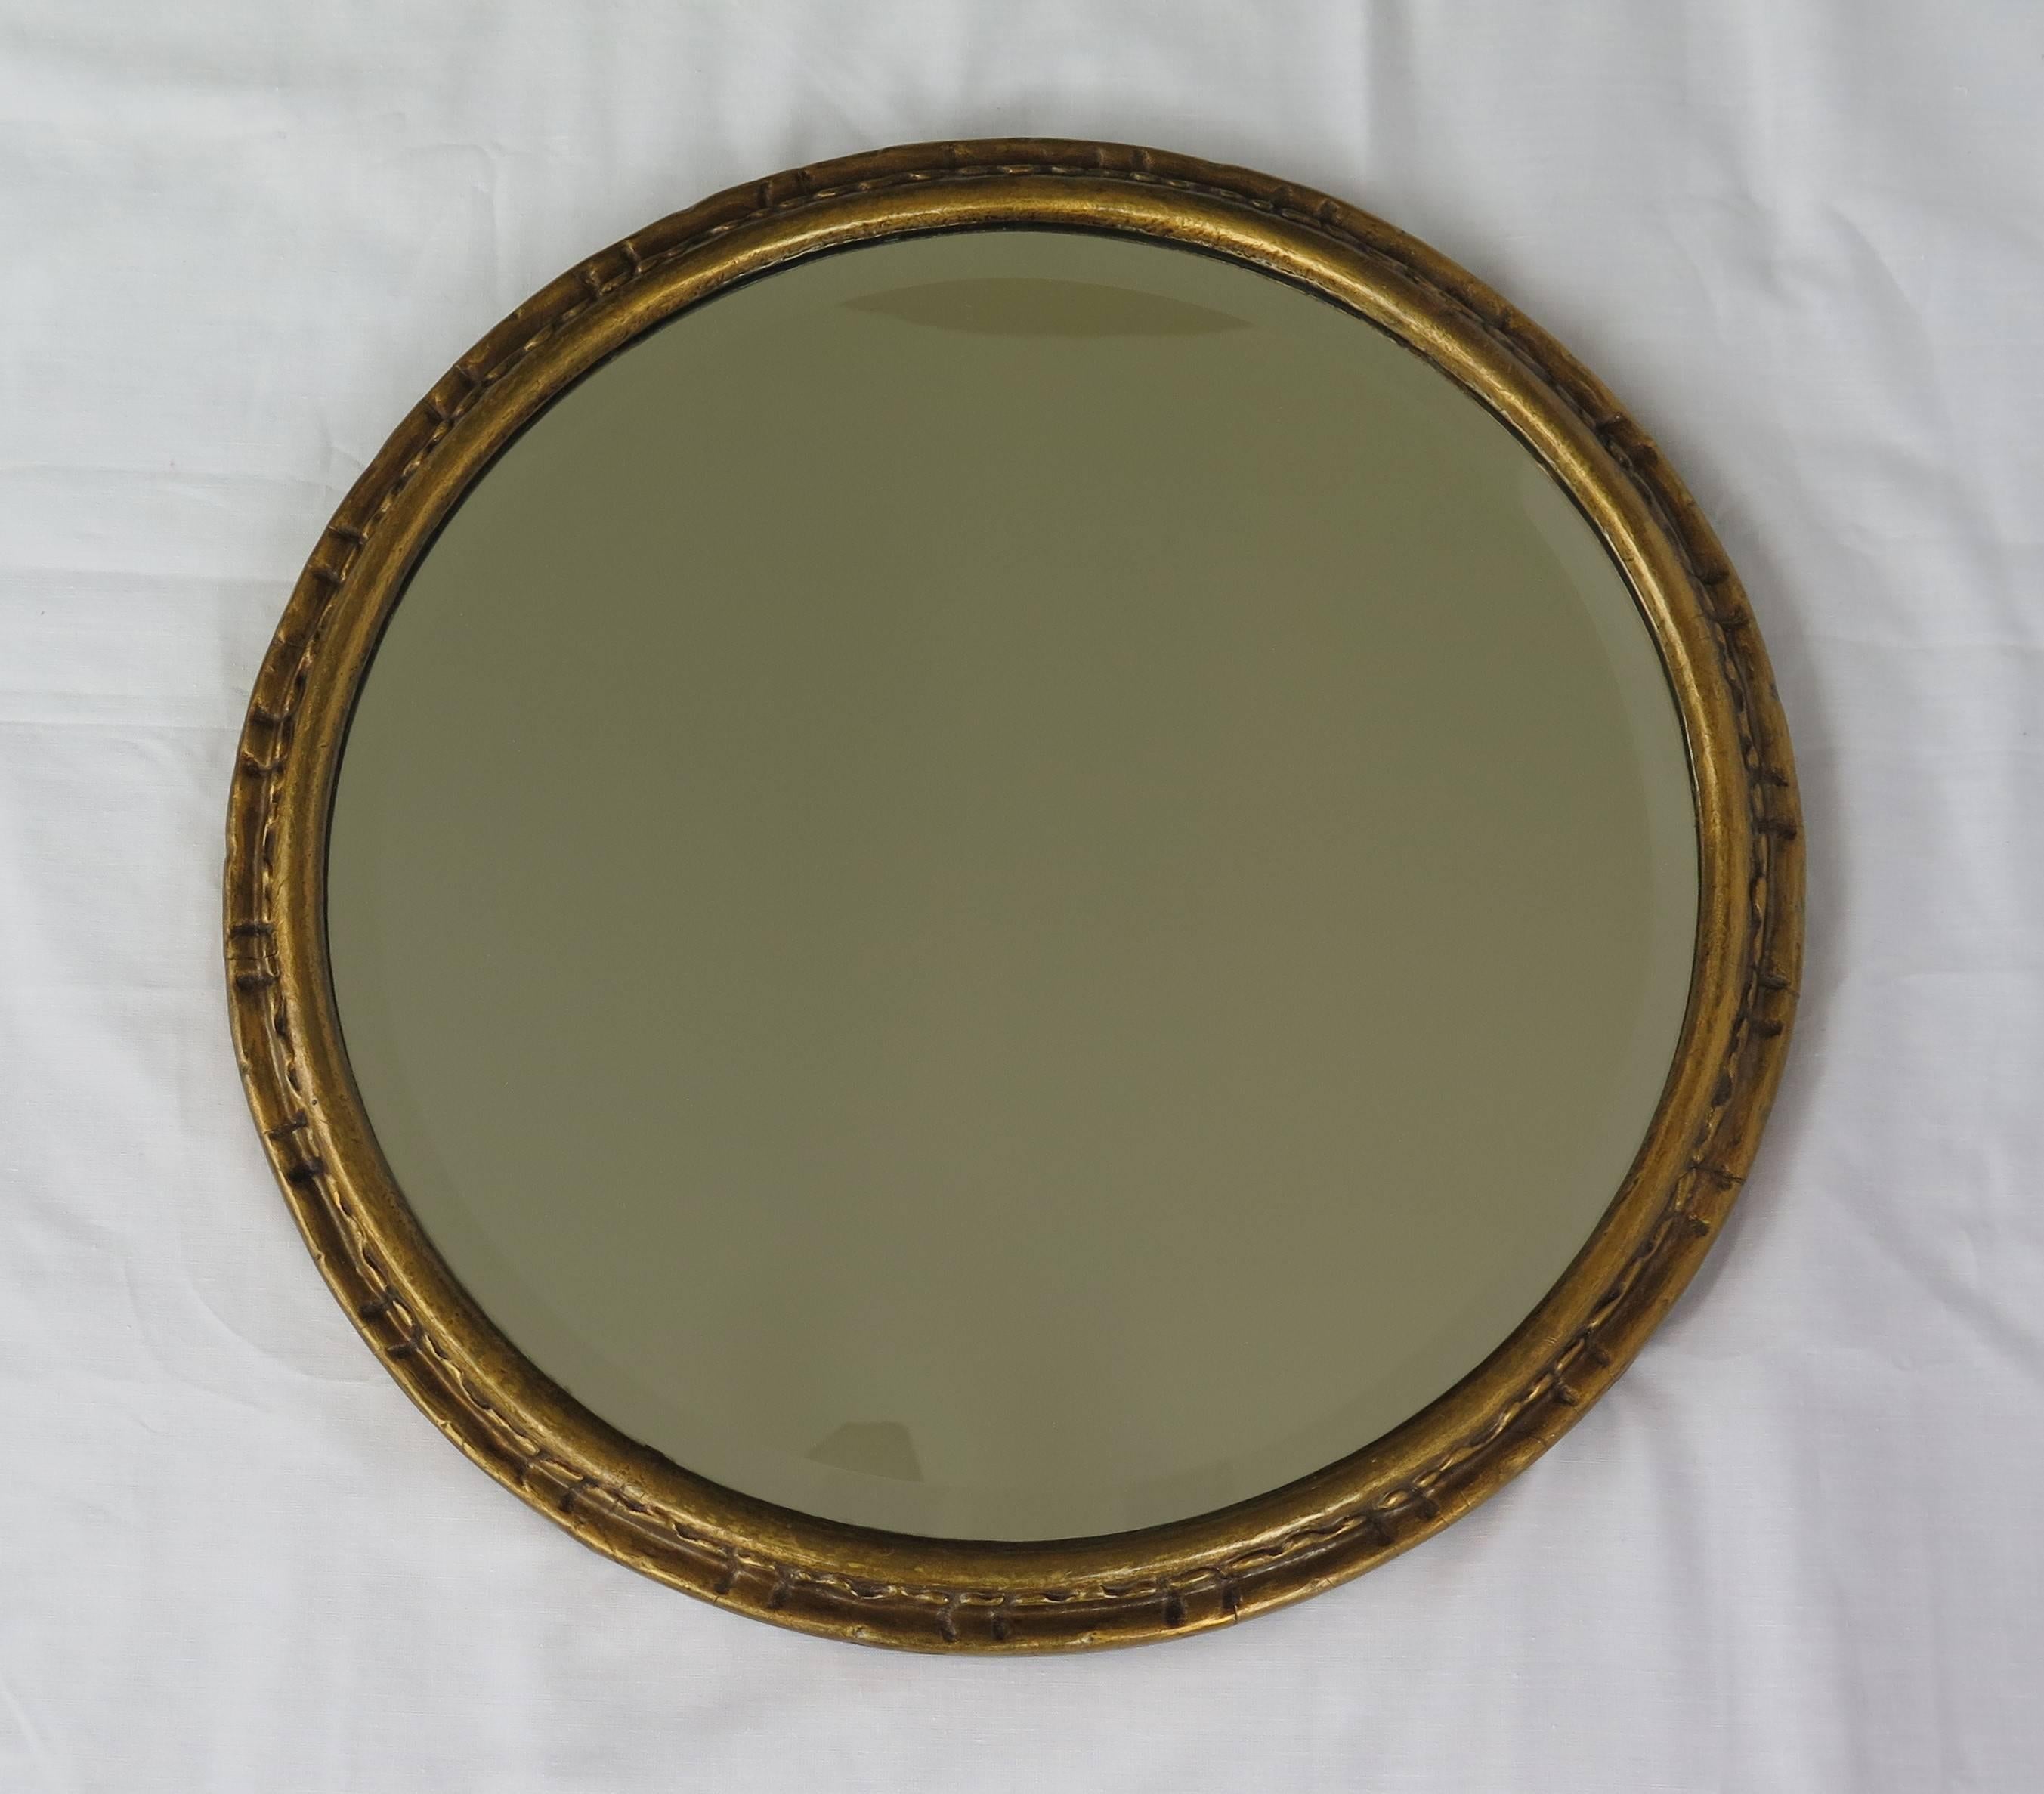 This is a good quality circular bevel glass wall mirror from the English late Victorian period, circa 1885.

The circular or round frame has a gold gilt-wood finish with a decorative moulded design to the outer frame as per the images. The mirror